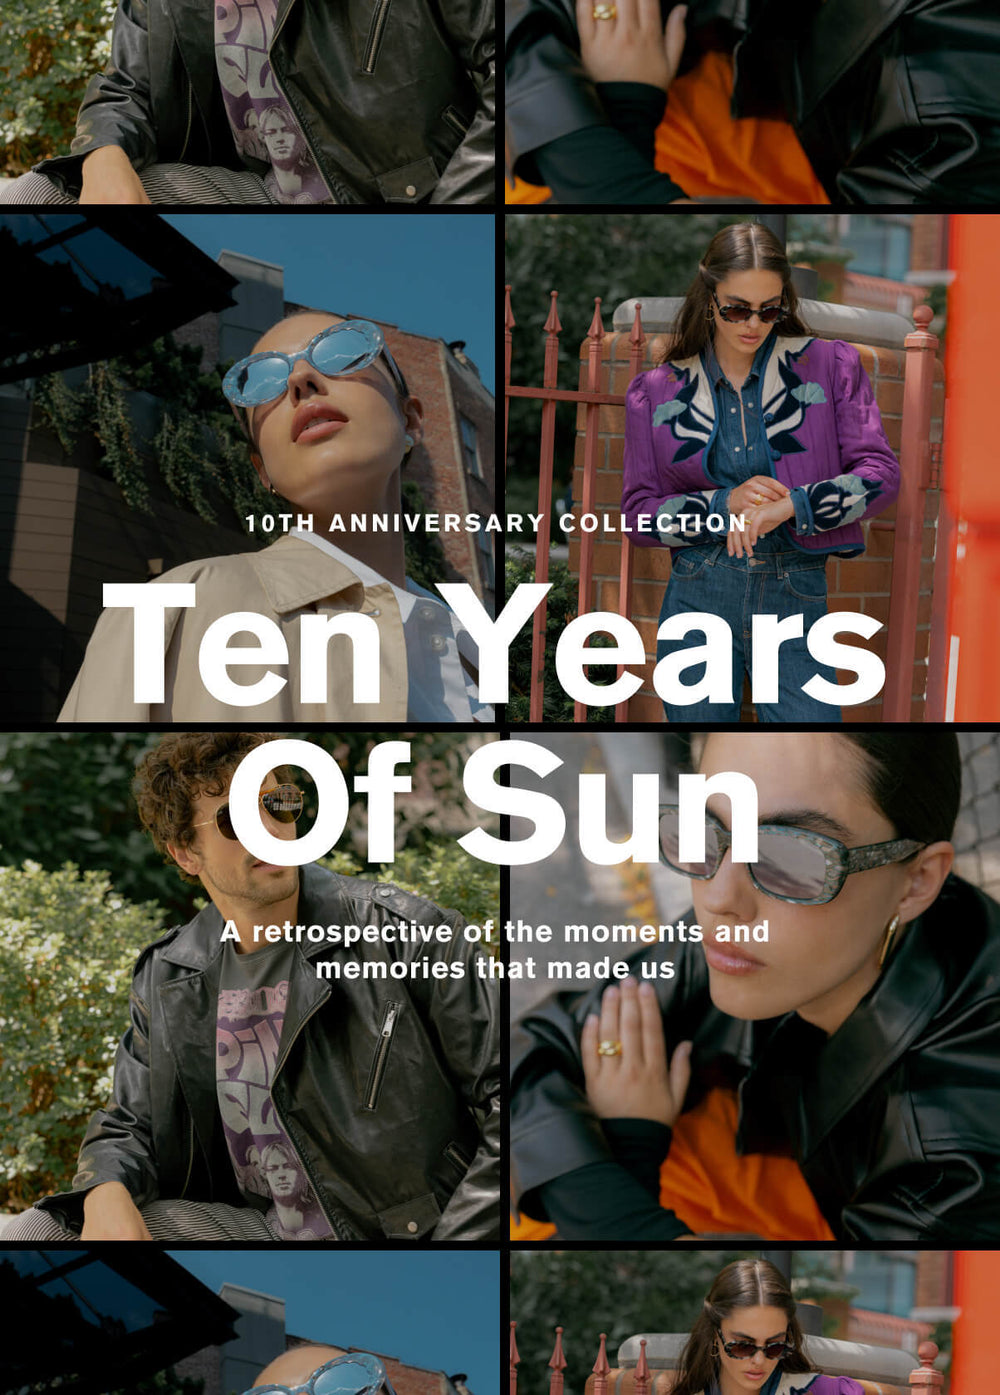 10th anniversary collection   ten years of sun  a retrospective of moments and memories that made us